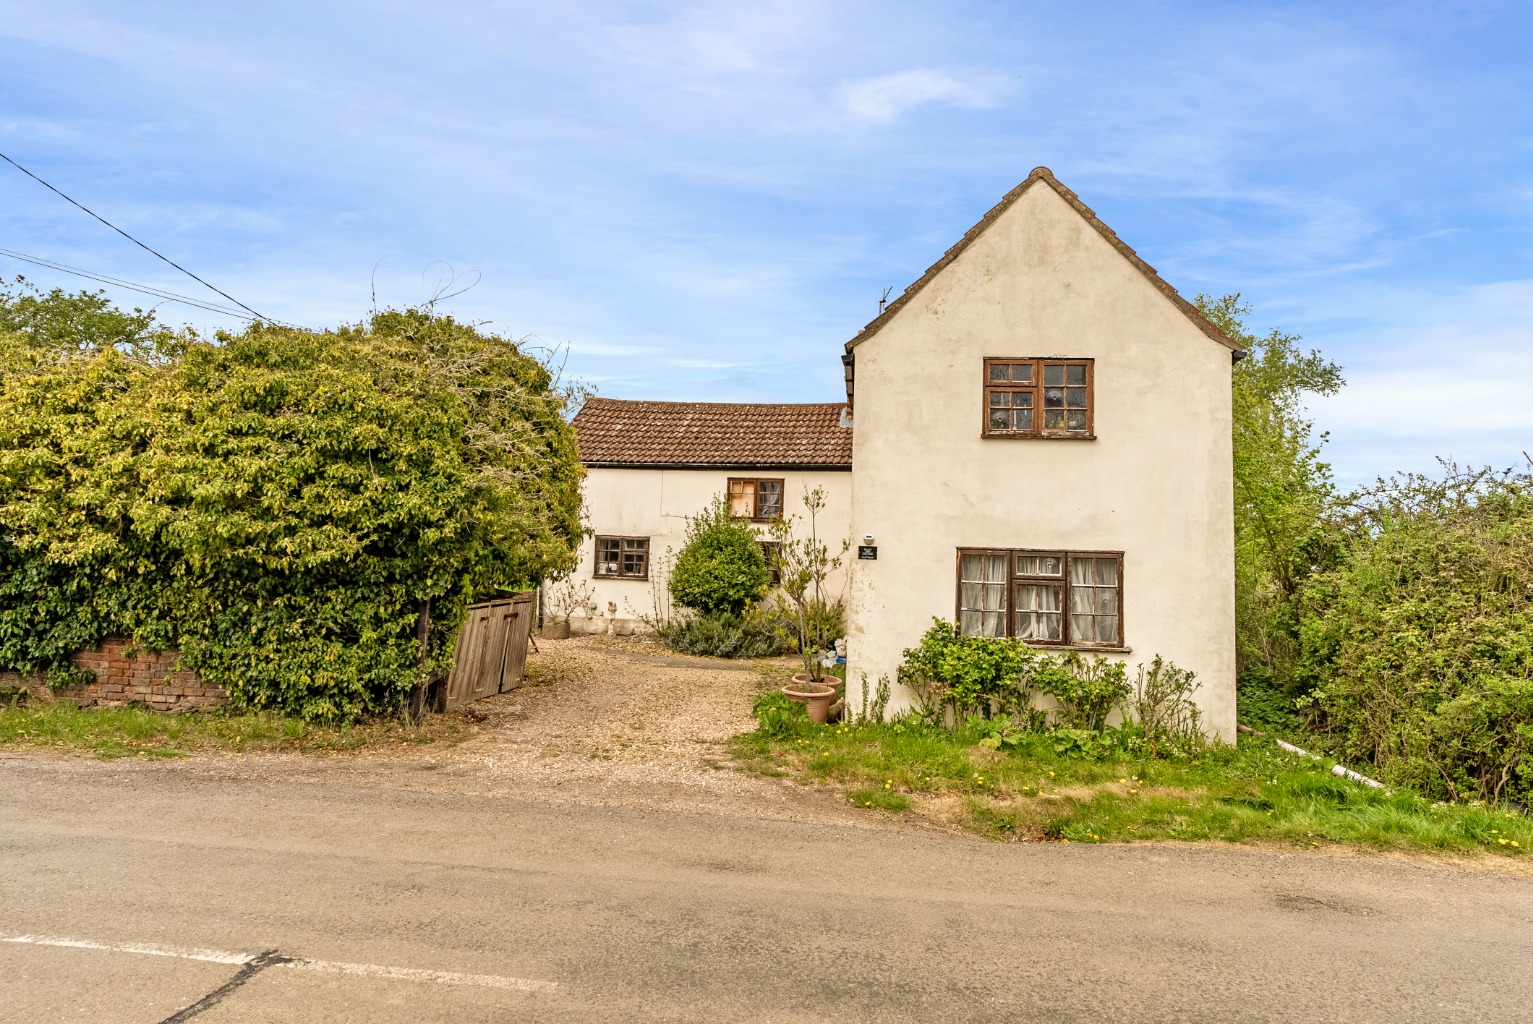 This is an excellent opportunity for the right buyer to either continue the refurbishment of this characterful cottage started by current owners, or potentially redevelop the property  altogether.